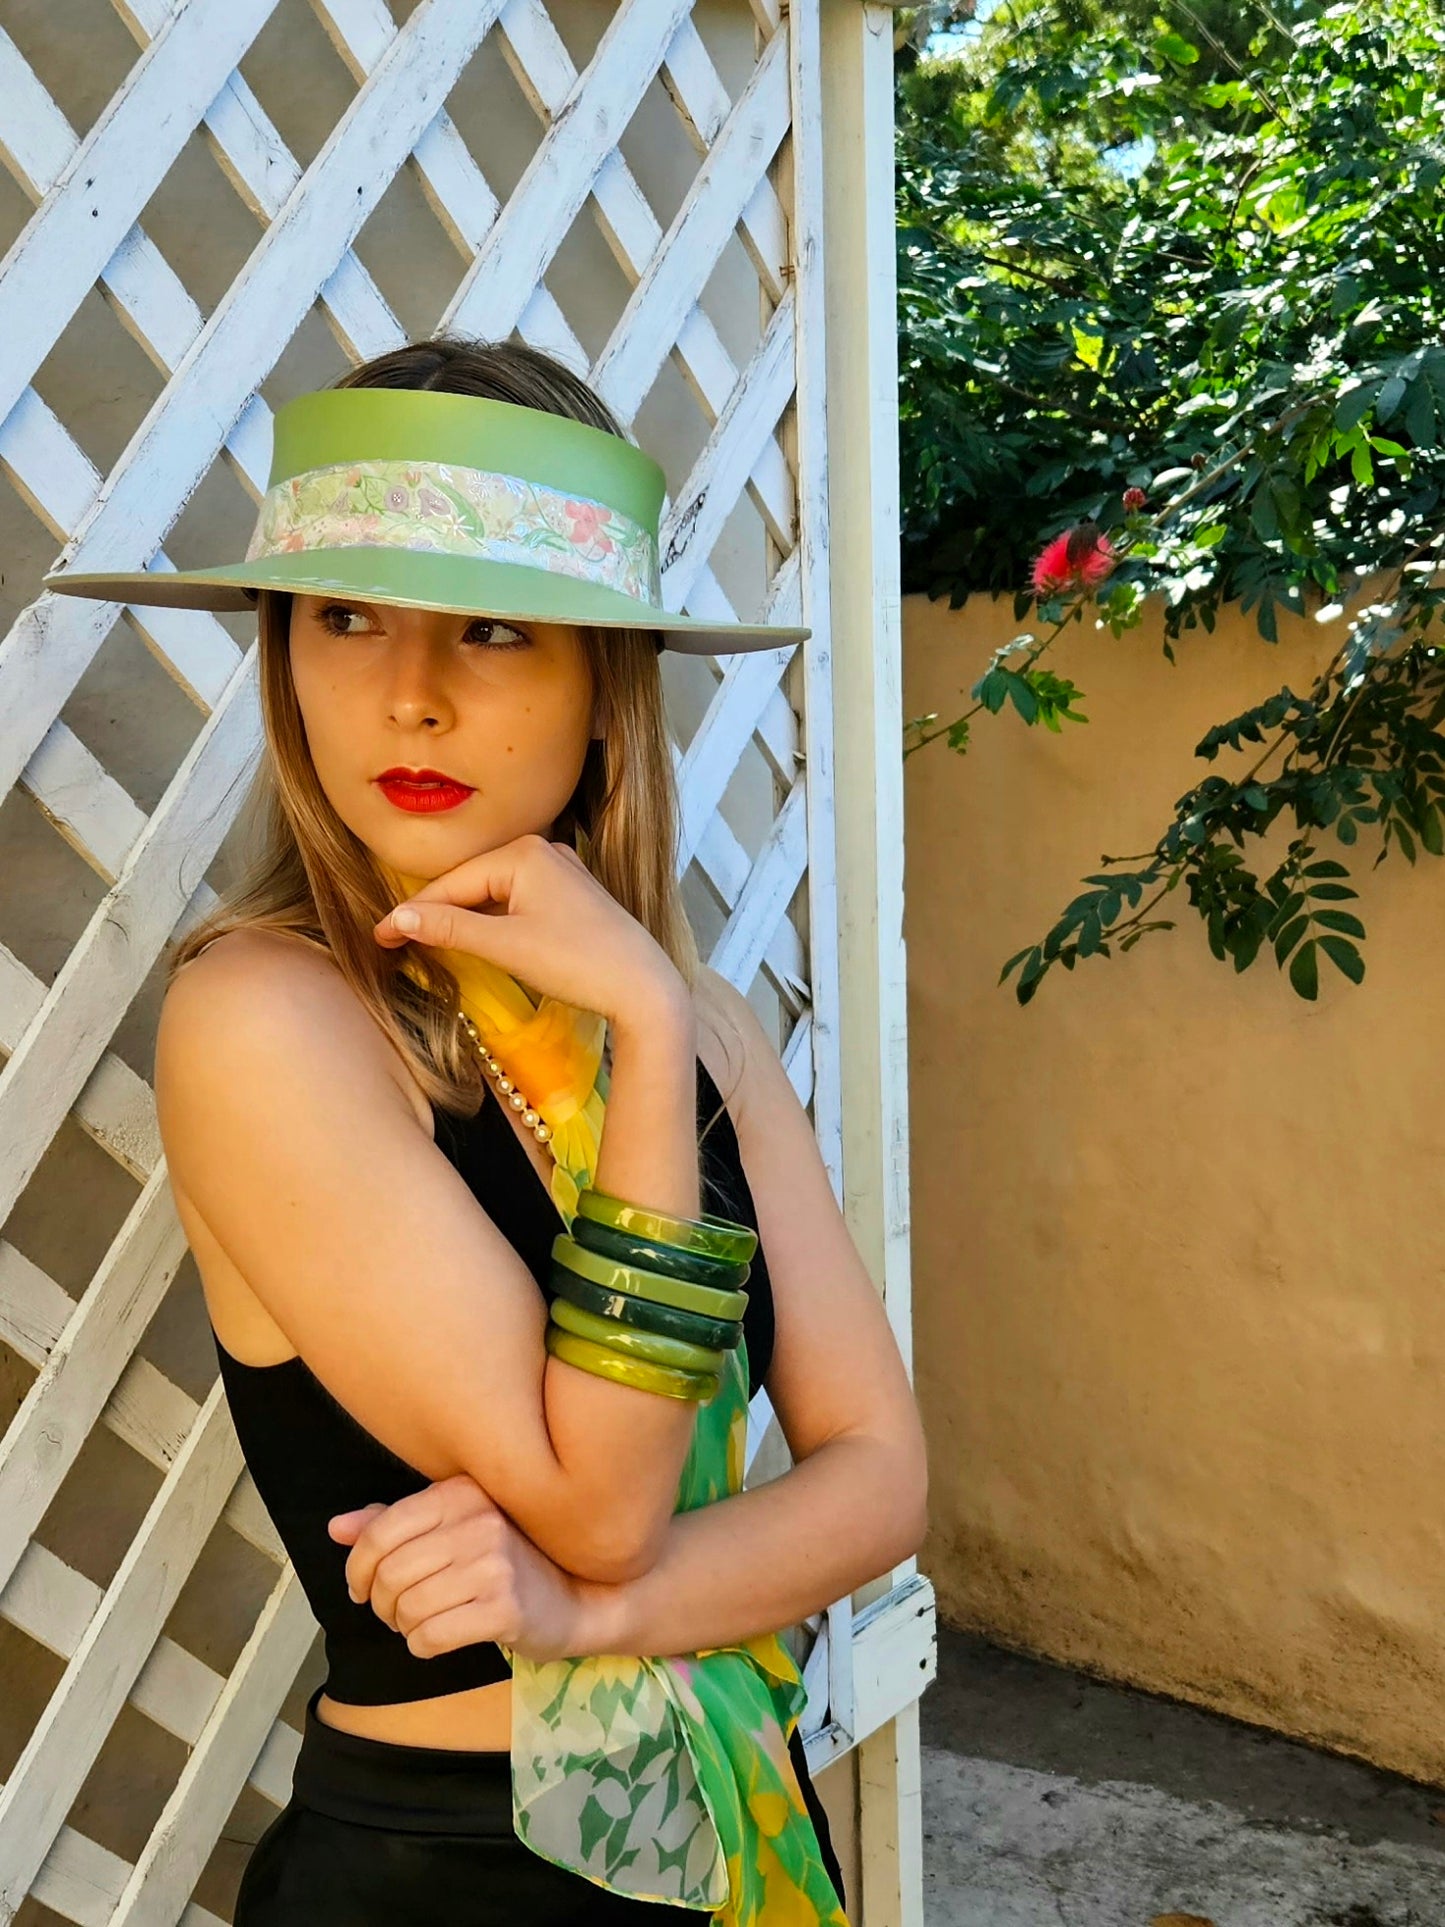 Spring/Summer Audrey Foam Sun Visor Hat with Bright Pastel Garden Band and Handpainted Floral Motif: Derby, Church, Golf, Pool, UV Resistant, No Headache